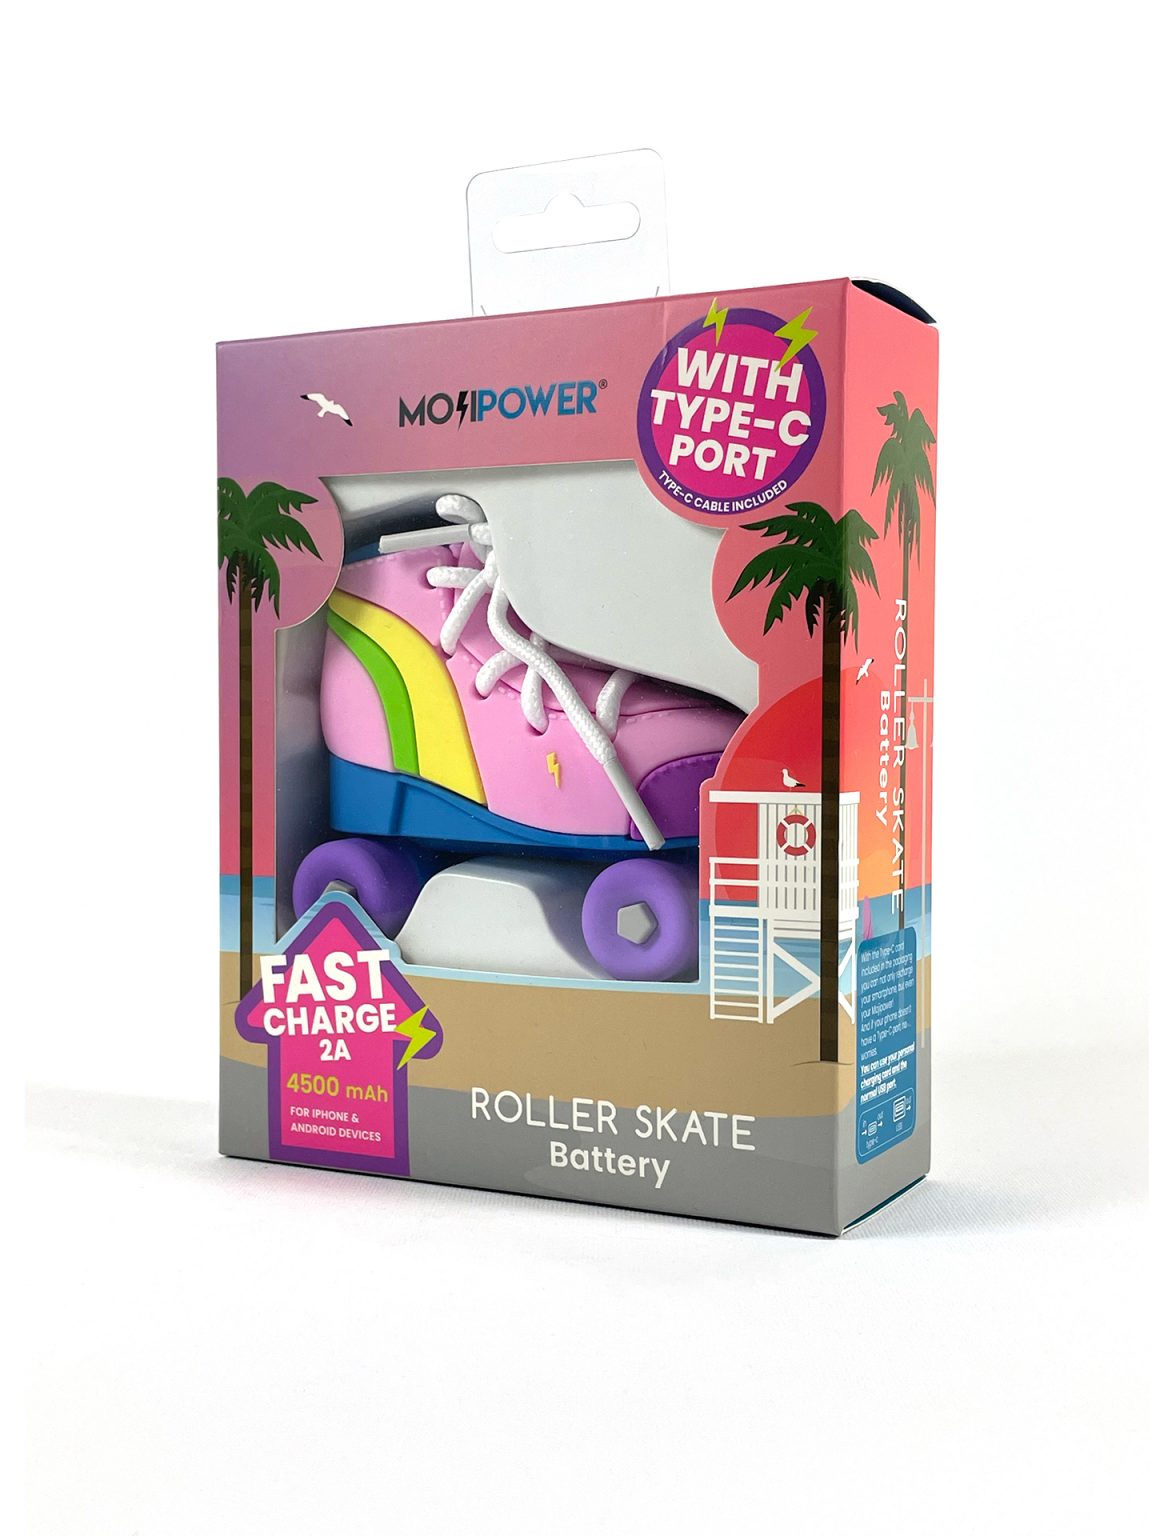 Roller Skate Power Bank Phone Charger - Mojipower